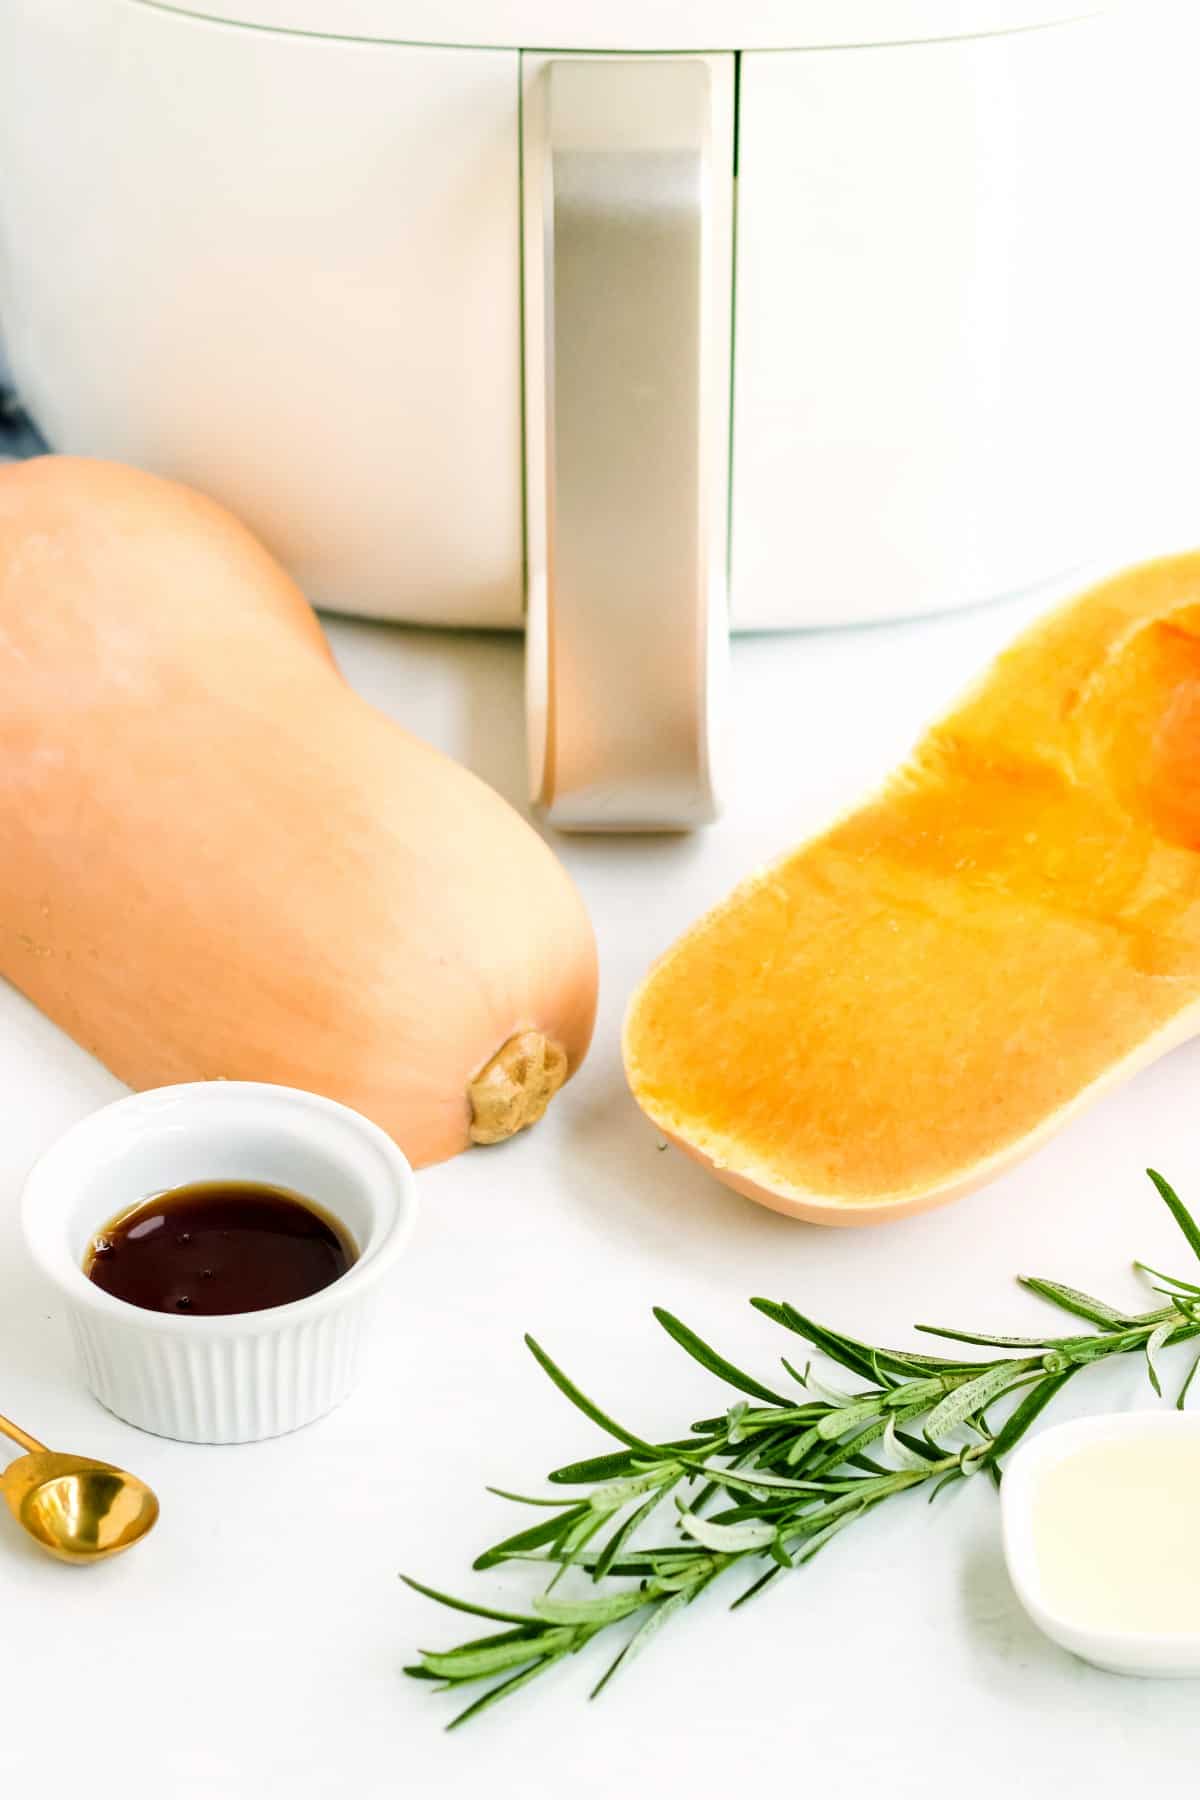 Six ingredients for air fryer butternut squash with air fryer in the back.